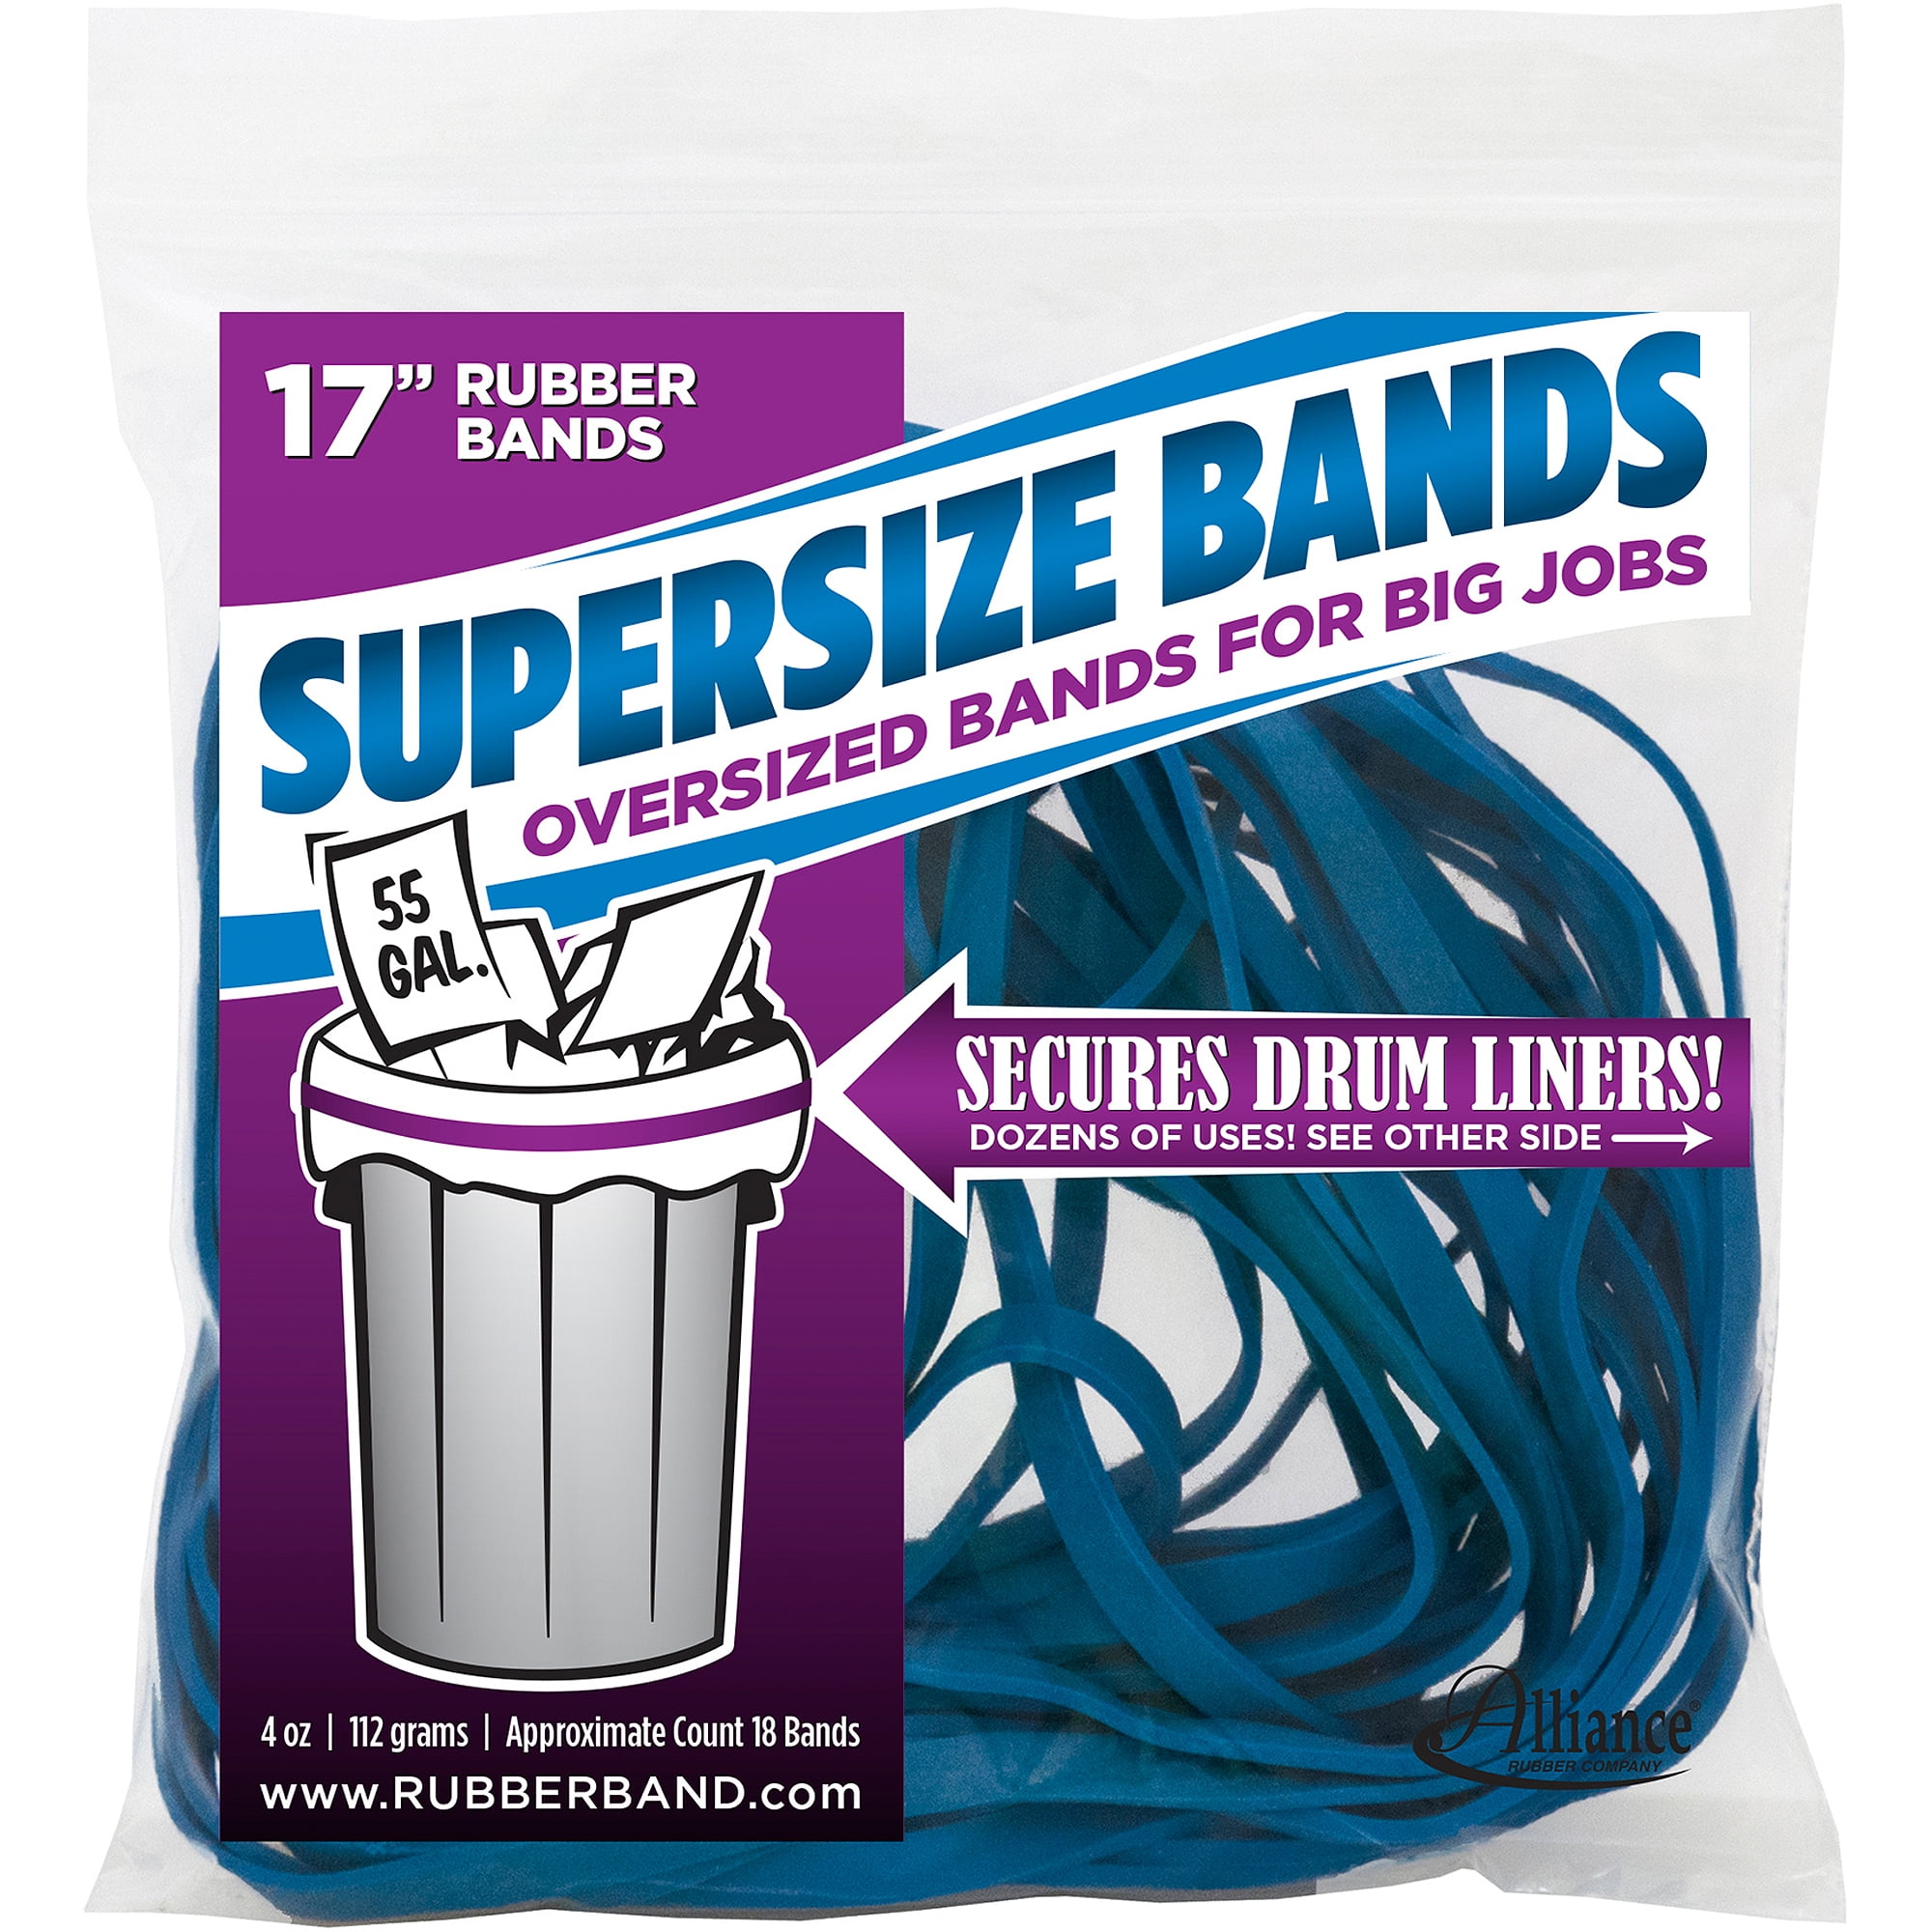 O'Band Rubber Bands - Large 500 gram Bag - The Foundry Home Goods